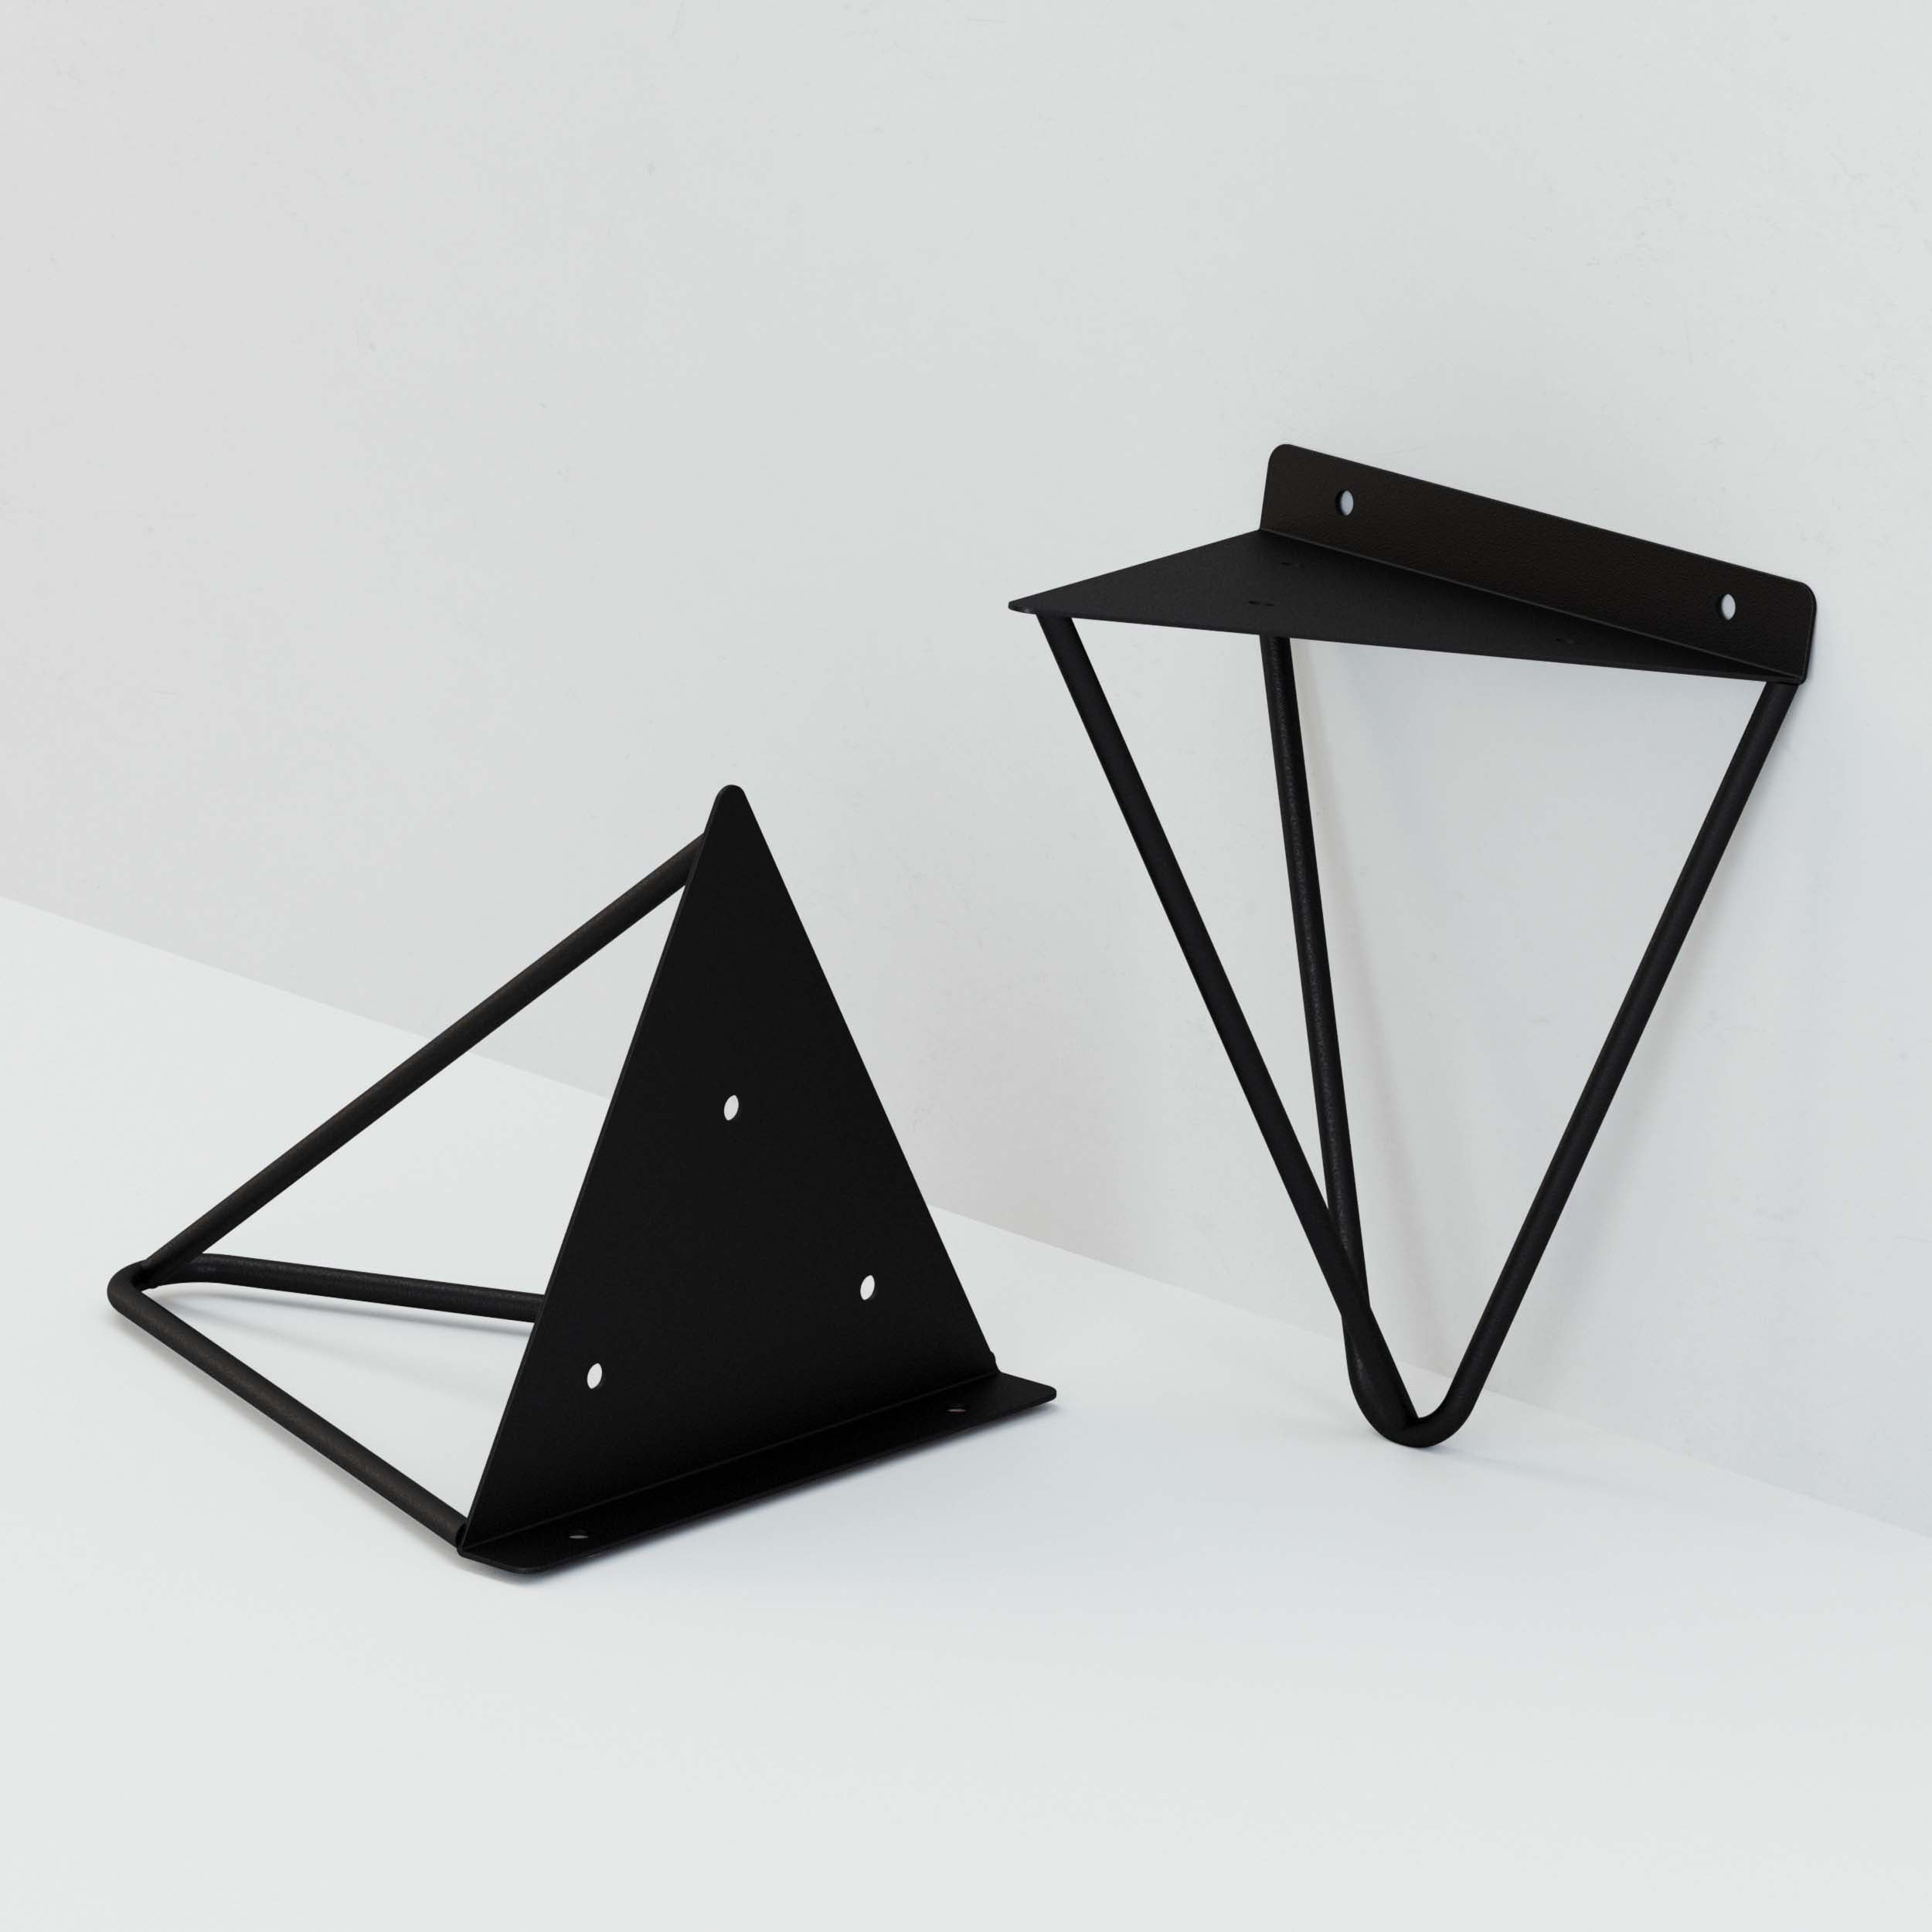 Two black triangular shelf brackets, one mounted and one on a flat surface.